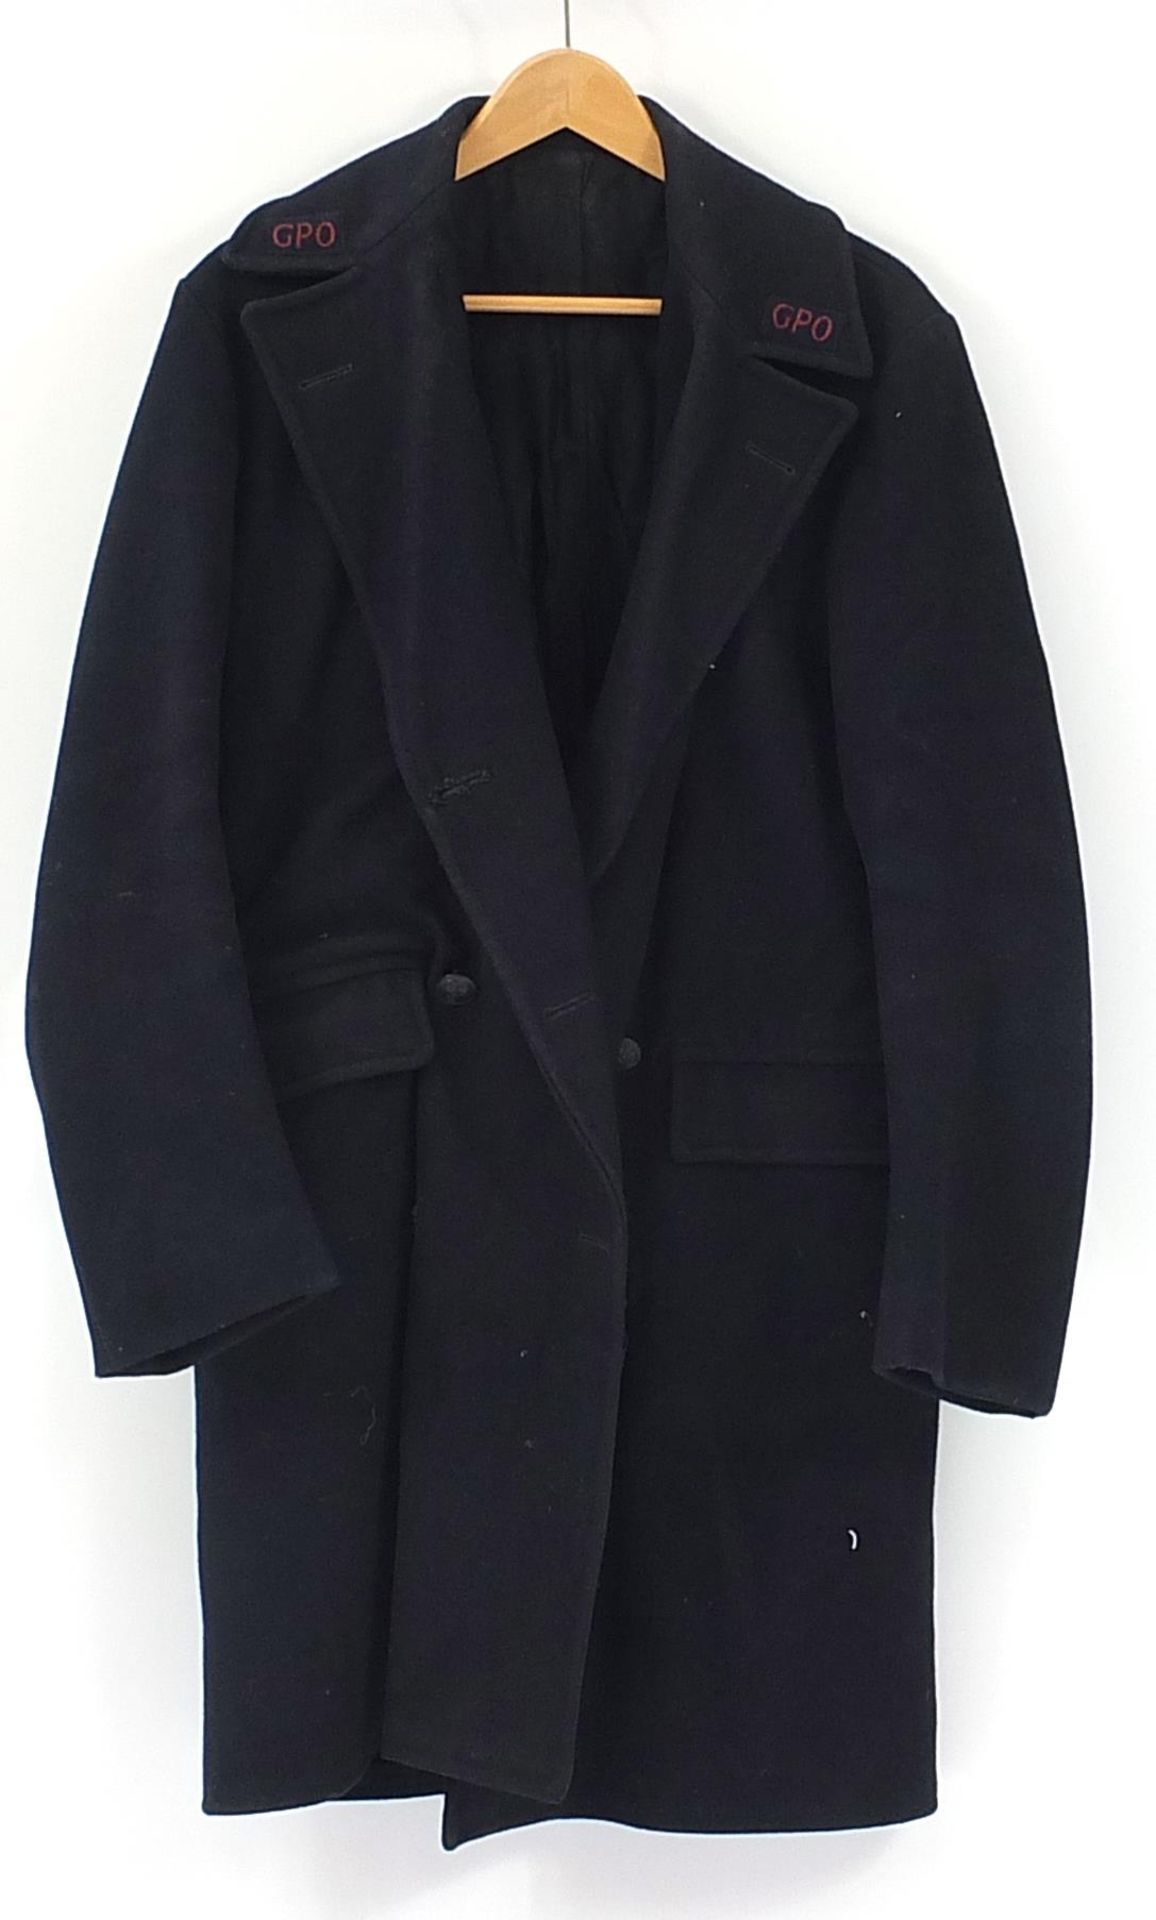 General Post Office trench coat with cloth patches